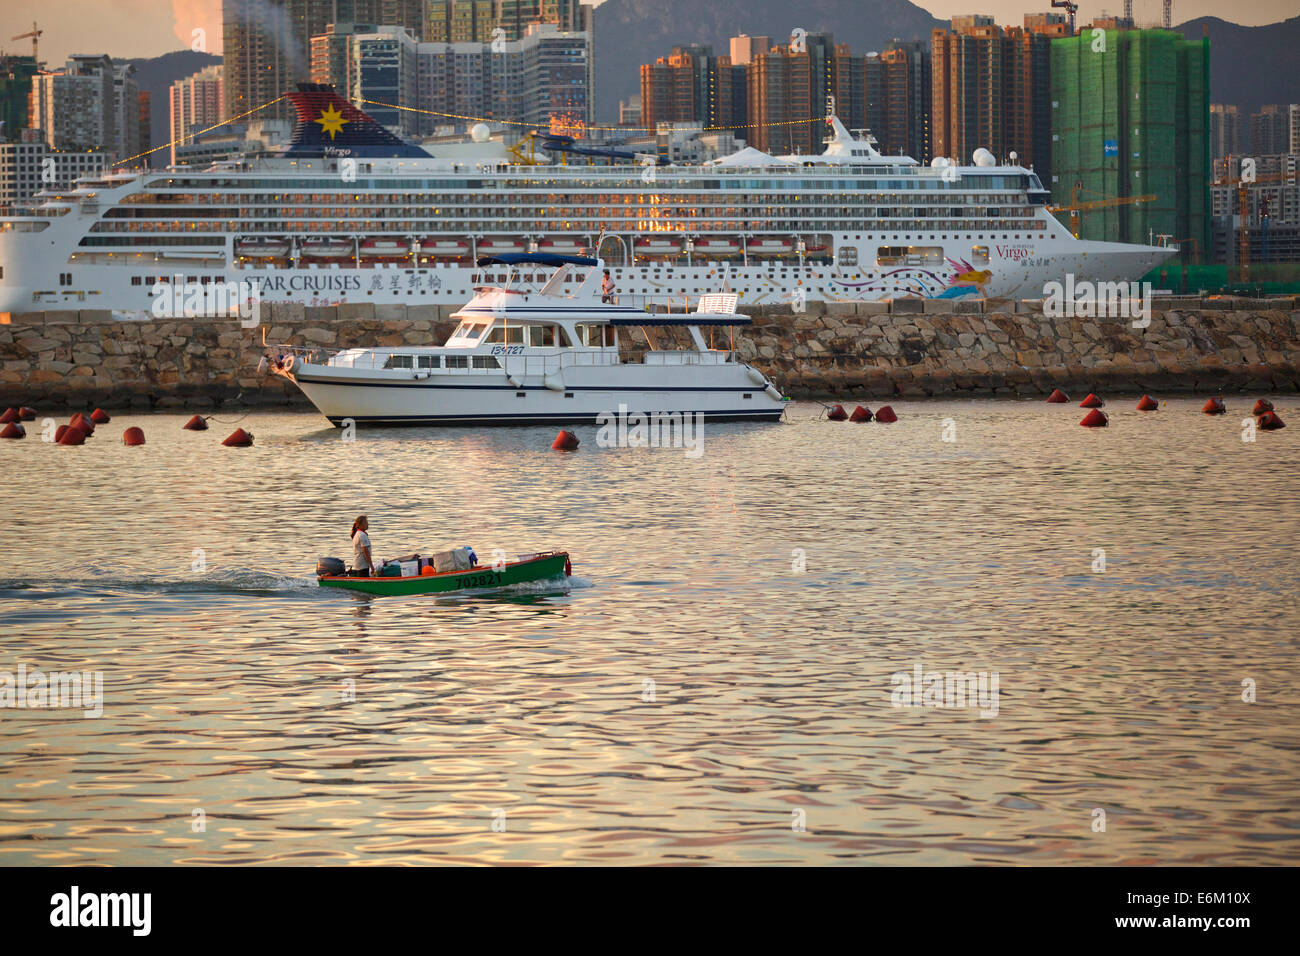 Contrasting Vessels. Small Boat In The Causeway Bay Typhoon Shelter And A Cruise Ship Passing Through Victoria Harbour, Hong Kong Skyline Behind. Stock Photo